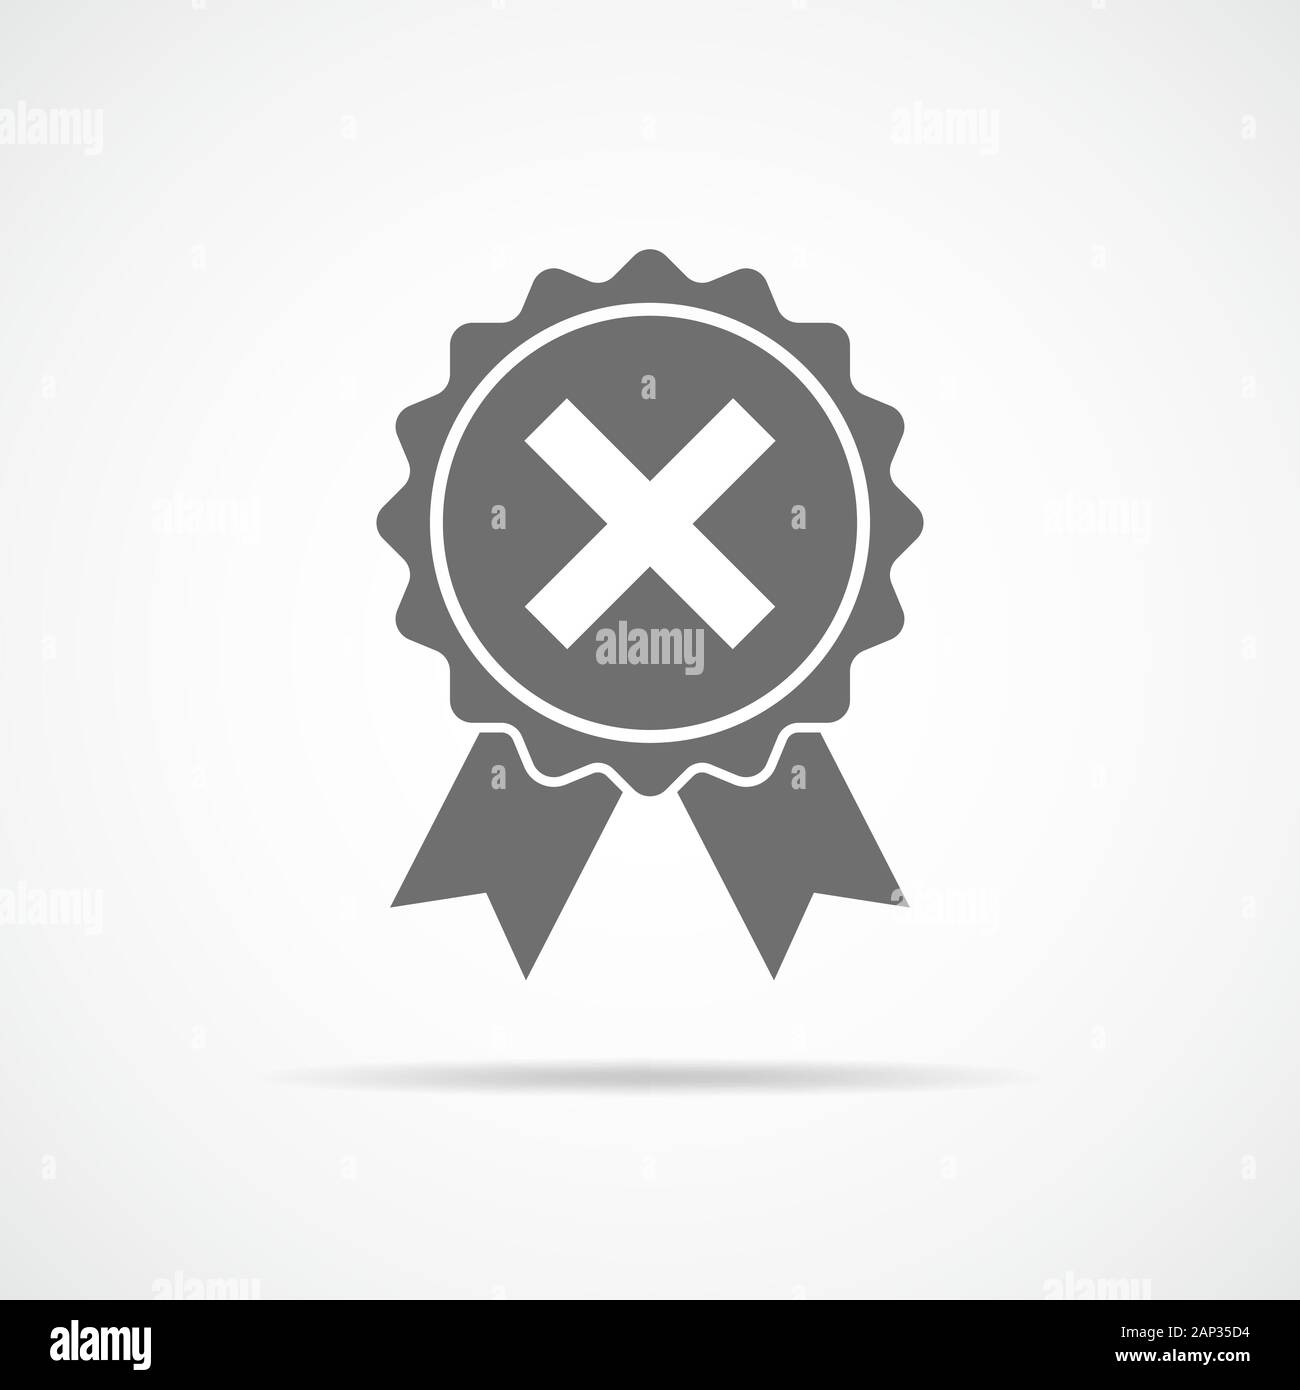 Gray reject icon in flat design. Cross mark on light background. Vector illustration. Stock Vector